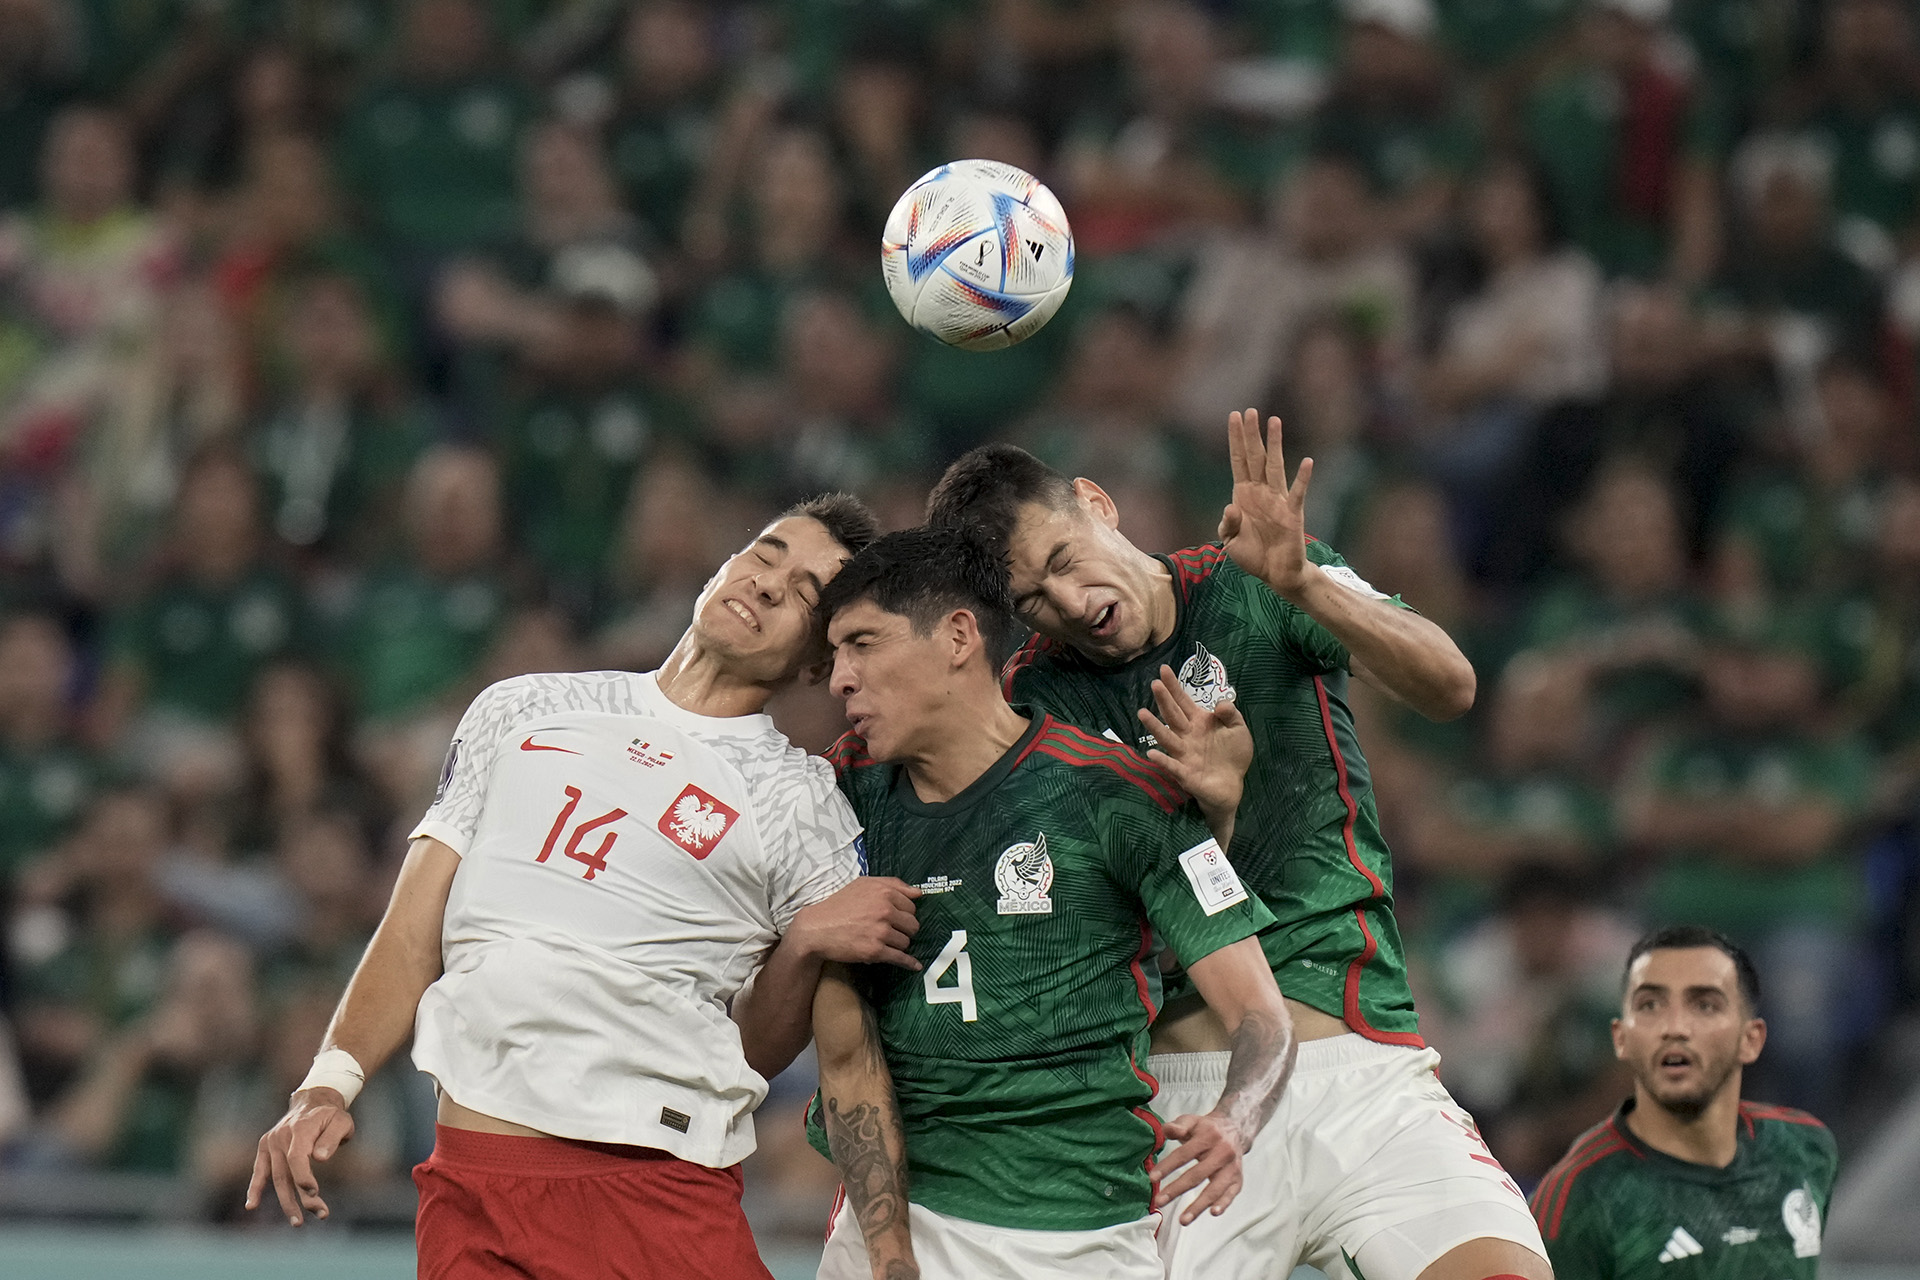 Mexico's Cesar Montes, right, and Edson Alvarez, center, fight for the ball with Poland's Jakub Kiwior during the World Cup group C soccer match between Mexico and Poland, at the Stadium 974 in Doha, Qatar, Tuesday, Nov. 22, 2022. (AP Photo/Moises Castillo)